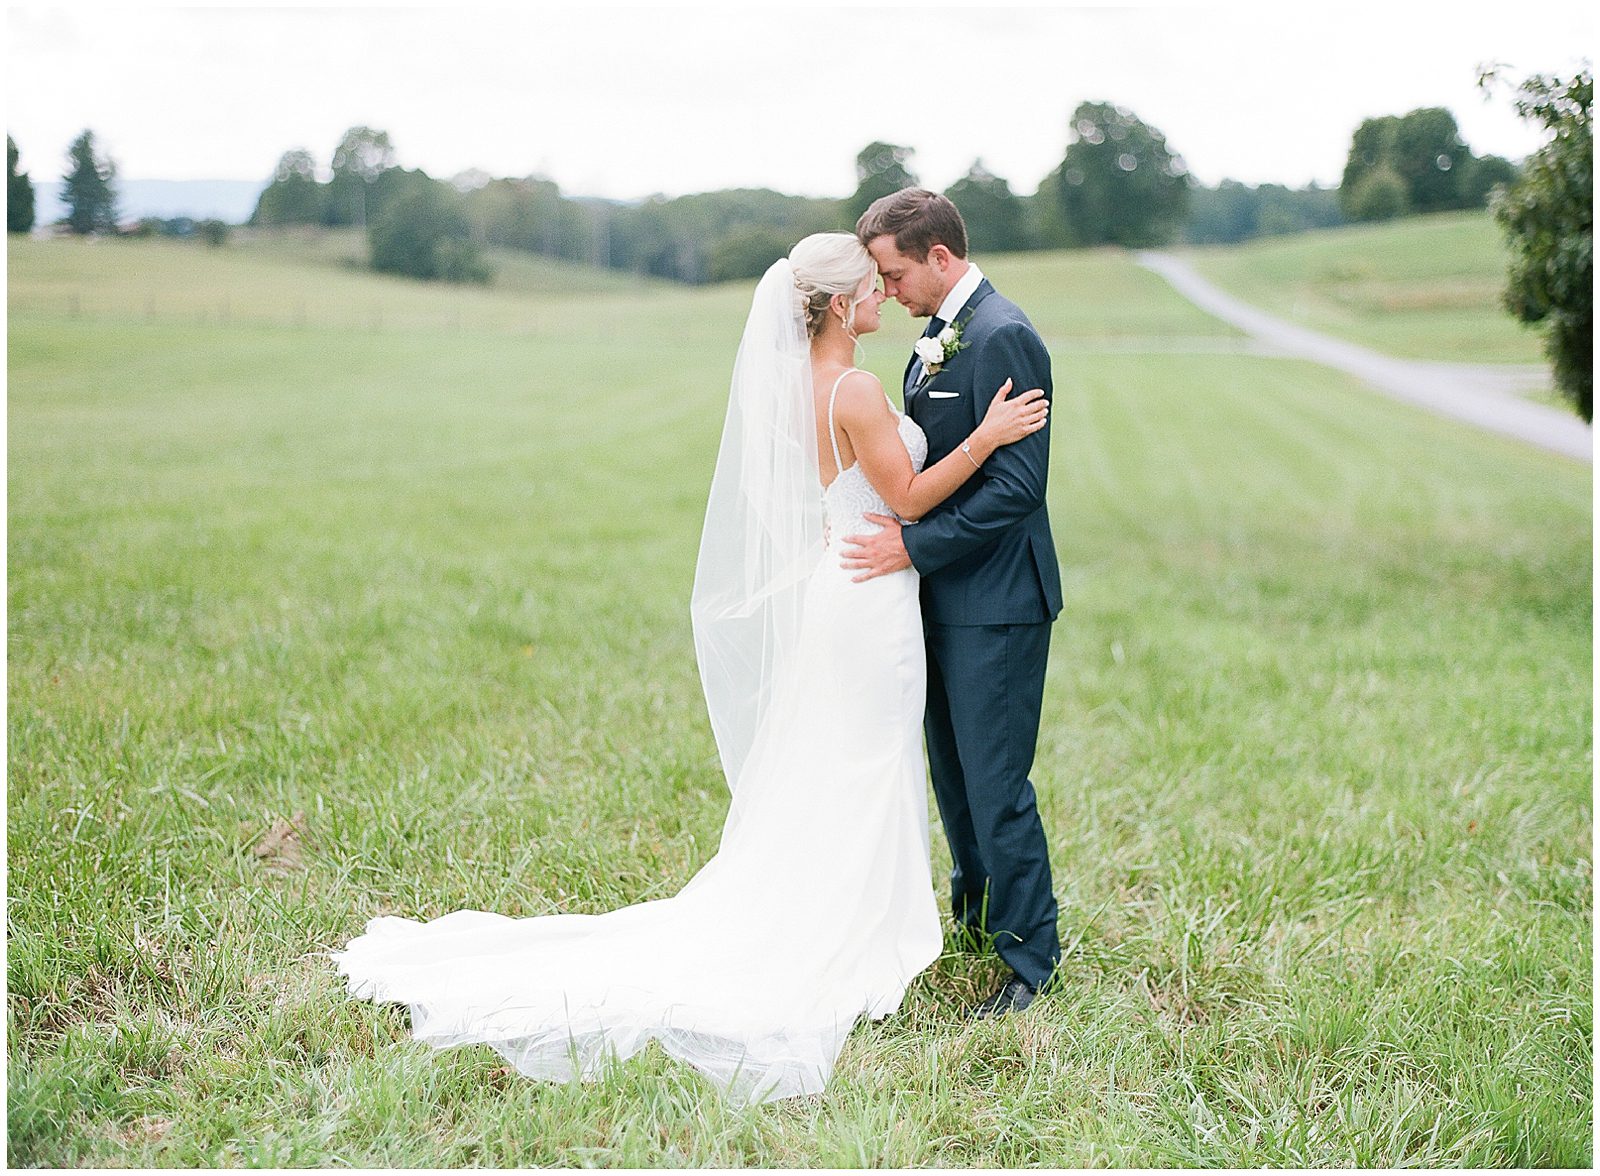 Bride and Groom Nose to Nose in Field Photo